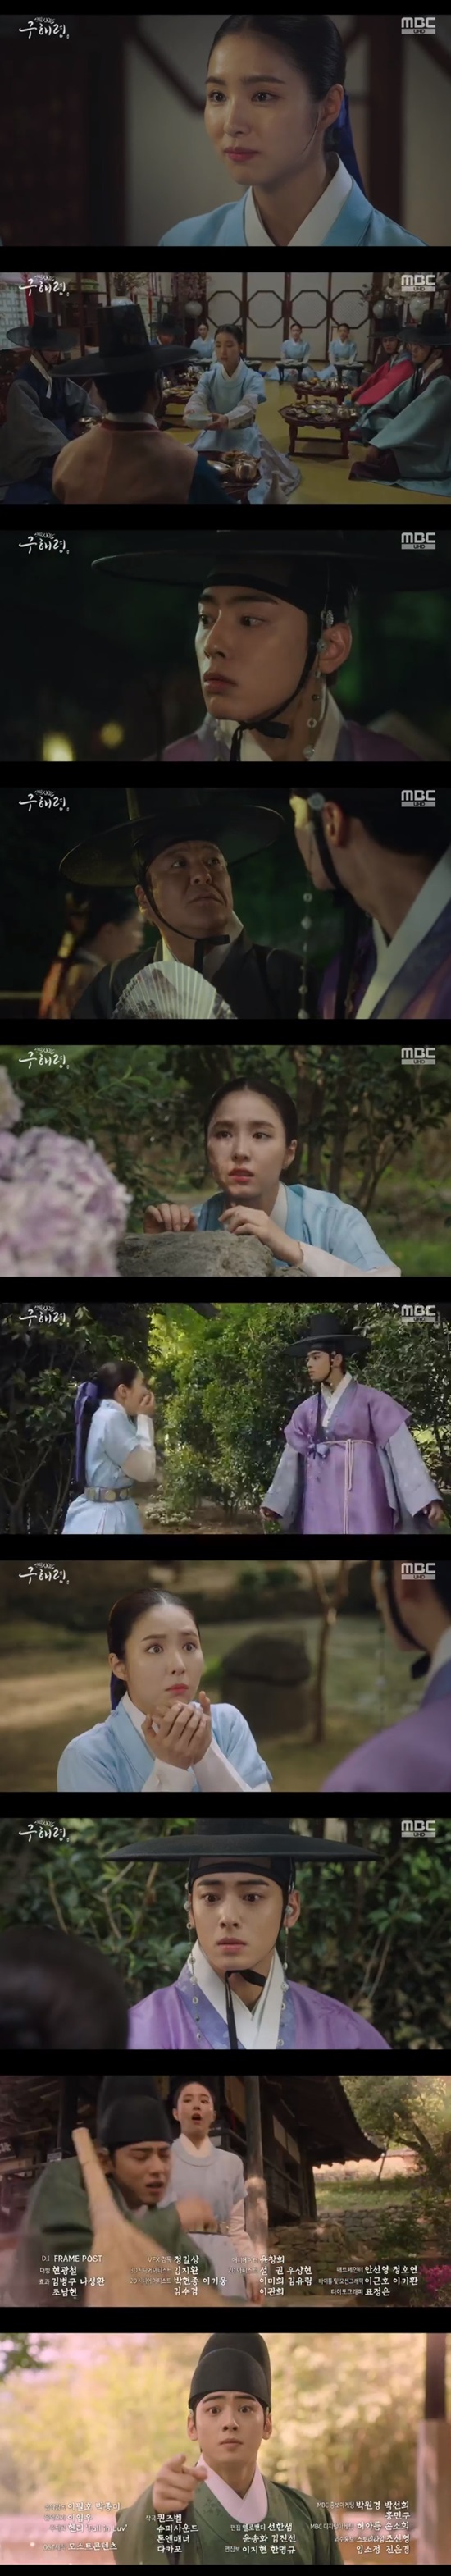 Prince Jung Eun-woo reunited with Shin Se-kyung at the palace, foreshadowing his inner circle.On July 24, MBC drama Na Hae-ryung (played by Kim Ho-soo/directed by Kang Il-soo Han Hyun-hee) was released as a military officer and reunited with Prince Lee Rim (played by Jung Eun-woo).Earlier, Koo Hae-ryung had a signing ceremony impersonating the author Plum (Lee Rim), and then he was caught by Lee Rim and made a fuss. When the king (Kim Min-sang) seized the gold, he resisted and received a marriage order from his brother, Koo Jae-kyung (Fairy Hwan).Koo Jae-kyung went to Wedding Bible to find out his brothers marriage, and Na Hae-ryung went to the prospective groom on the day before Wedding Bible and pleaded for his knee to leave the marriage.Then, when the Wedding Bible Day prospective groom informed the former Na Hae-ryung of the breakup at the request of the former, he jumped out of the baro and stared at the extraordinary time of picking the first lady.The tax collector Lee Jin (Park Ki-woong) asked how the sky would prevent the Japanese eclipse from being scolded by the king, and Na Hae-ryung wrote, The eclipse is a natural phenomenon, so we should know Baro.Min Woo-won (Lee Ji-hoon) recommended Lee Jin for the answer, and Lee Jin looked at Na Hae-ryung.Lee Jin told Na Hae-ryung, Chosun is poor. People who worry about eating tomorrow and cannot find a lawmaker are the placenta. Learning is also the privilege of people like you and me.My poetry is wrong, too. But I put Na Hae-ryung on the list of successful candidates.Koo Hae-ryung passed along with Oh Eun-im (Lee Ye-rim) Hearan (Jang Yu-bin), and Song Sa-hee (Park Ji-hyun) took the manor.But for those who became the first lady, the people of the precepts ignored them openly, and Na Hae-ryung proved to be victorious by winning a drinking match with Yang Si-haeng (Heo Jeong-do) at the ceremony.In the meantime, Lee was able to escape the meltdown party with the consideration of his brother Lee Jin, and he knew the name of GLOW Koo Na Hae-ryung, who impersonated himself earlier in the bookstore.Irim sent a testimonial to Na Hae-ryung and waited on the bridge, and Husambo (Sung Ji-ru) said, The GLOW will not come out. Who will come out to send an unexpected testimonial to apologize?Whats that look like, a man whos been stood up by Choi Jung-in, he said.Irim said, What a nonsense, Choi Jung-in, the enemy Choi Jung-in. He replied, Or not. What are you so hot?At the same time, Na Hae-ryung returned home in a drunken state and the next morning, he slept late and found the dog that went into the palace.The Hole was on the Green West Side, where officials were banned from entering.Na Hae-ryung hid when he saw Heo Sam-bo, and Lee Rim, who discovered Na Hae-ryung, reunited, asking if he had lost his way.The ending was decorated with the appearance of Koo Hae-ryung and Lee Rim recognizing and appalling each other in an unexpected place.Through the trailer, Irim was portrayed as a plum artist who wrote a novel about the salt, pretending to be a prince.Yoo Gyeong-sang